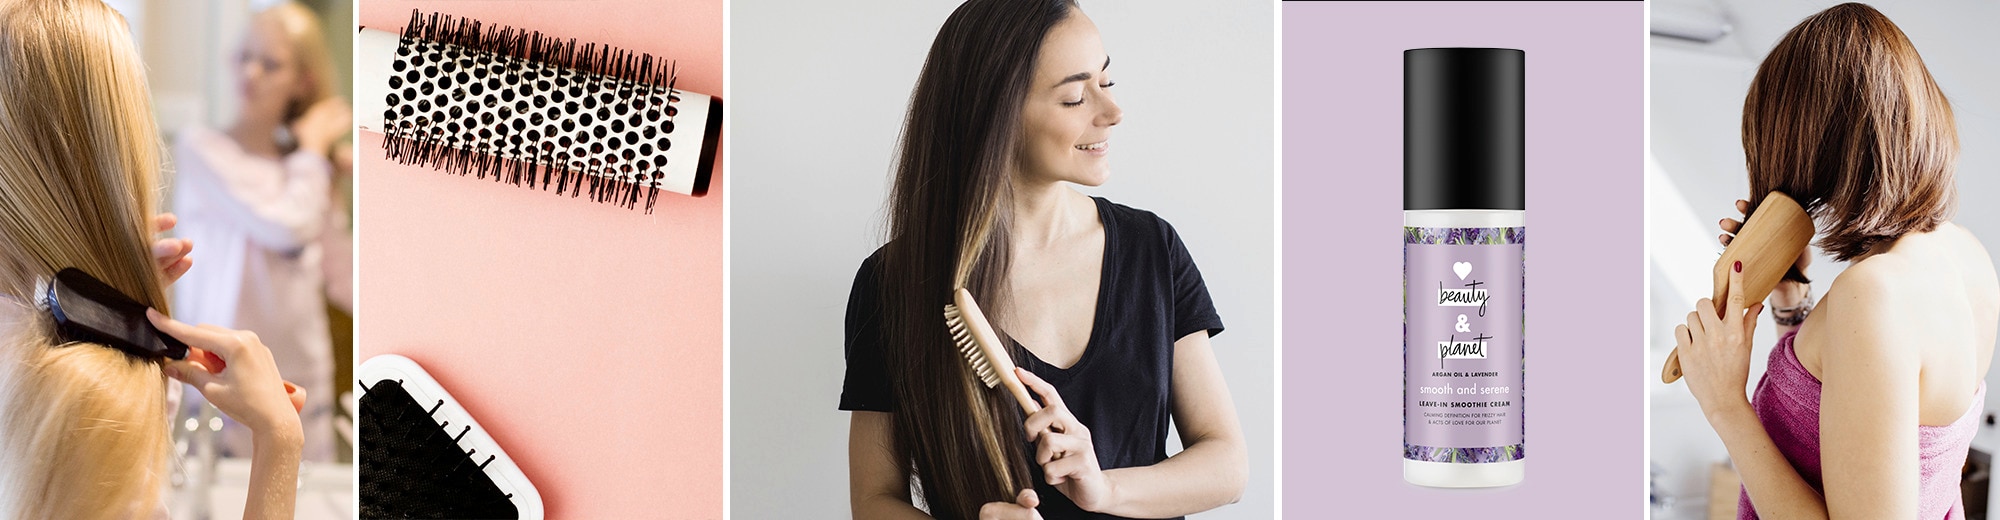 How to brush your hair the right way: Women brushing their hair